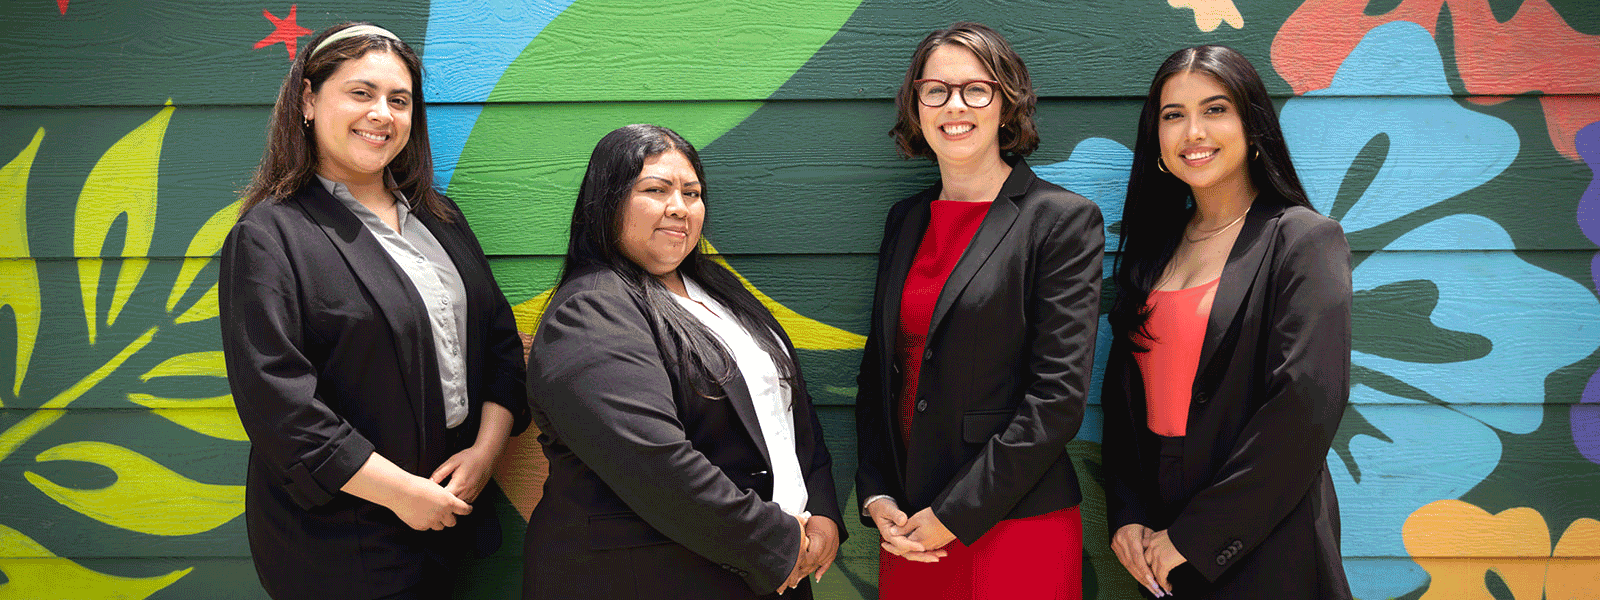 Adelante Legal team consisting of four lawyers standing in front of a colorful mural in Oakland, California.